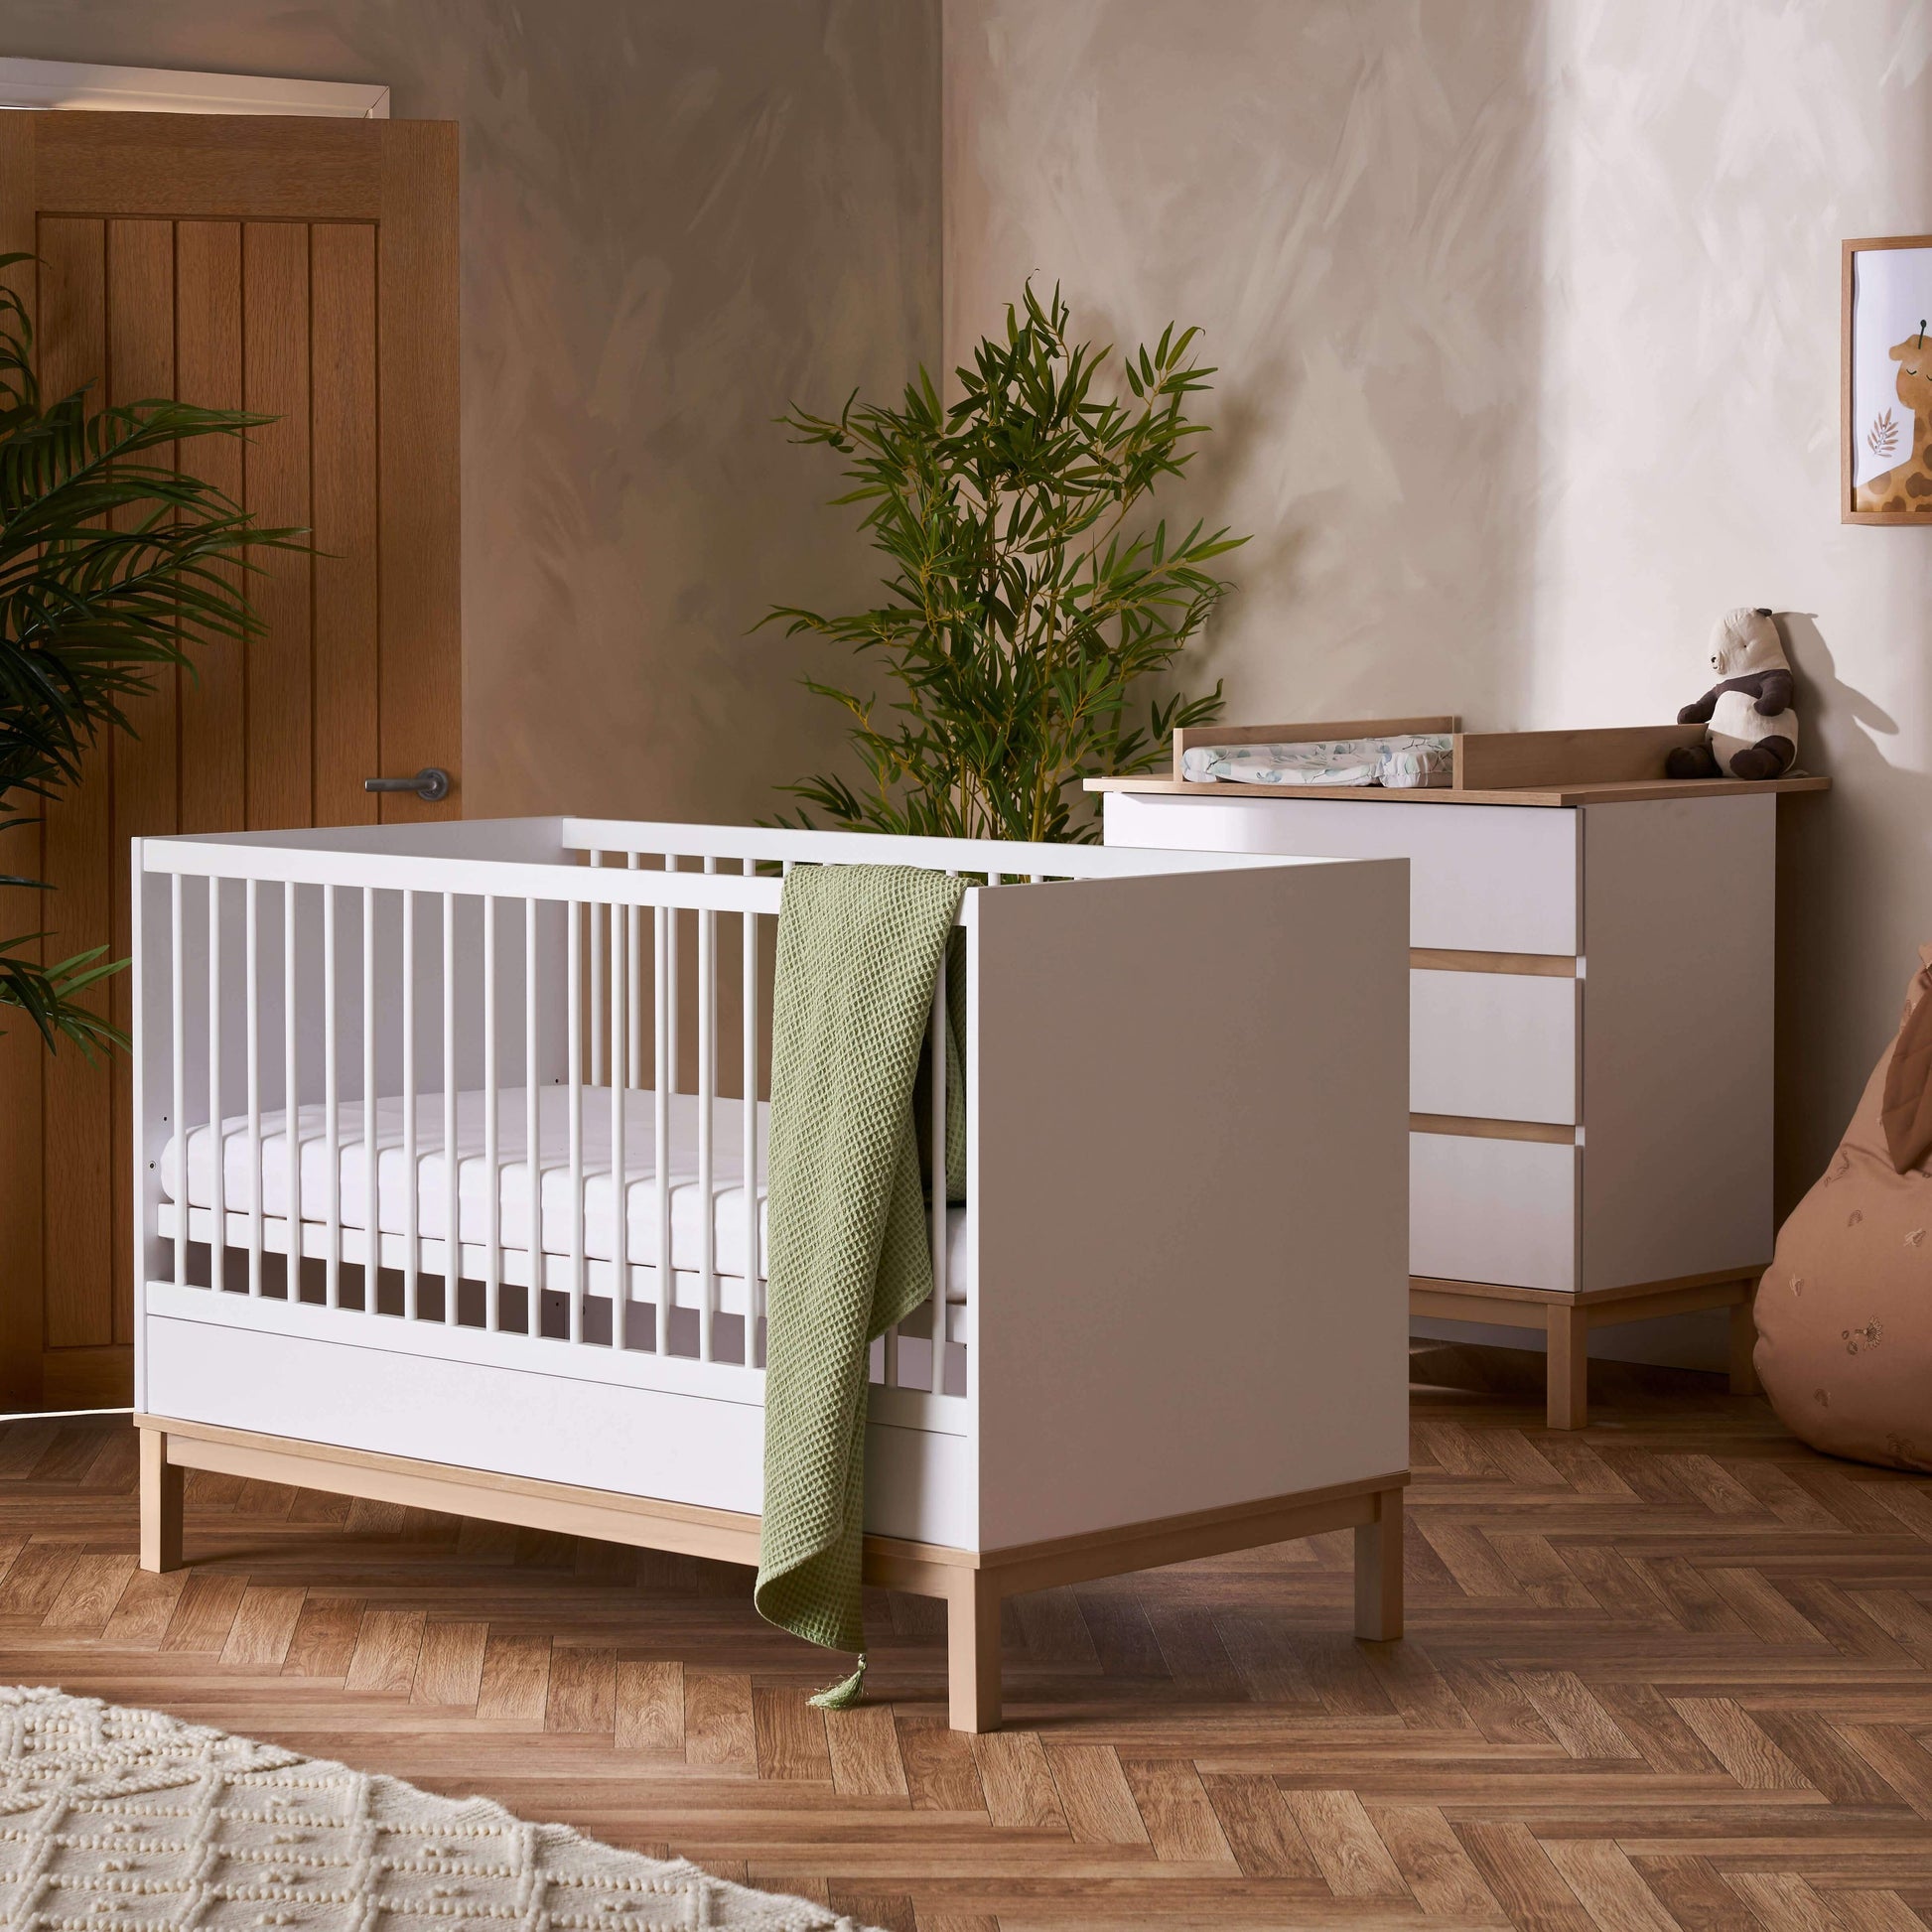 2 piece set in a White finish - Including the Astrid Cot Bed and Changing Unit - 21OB3302D2